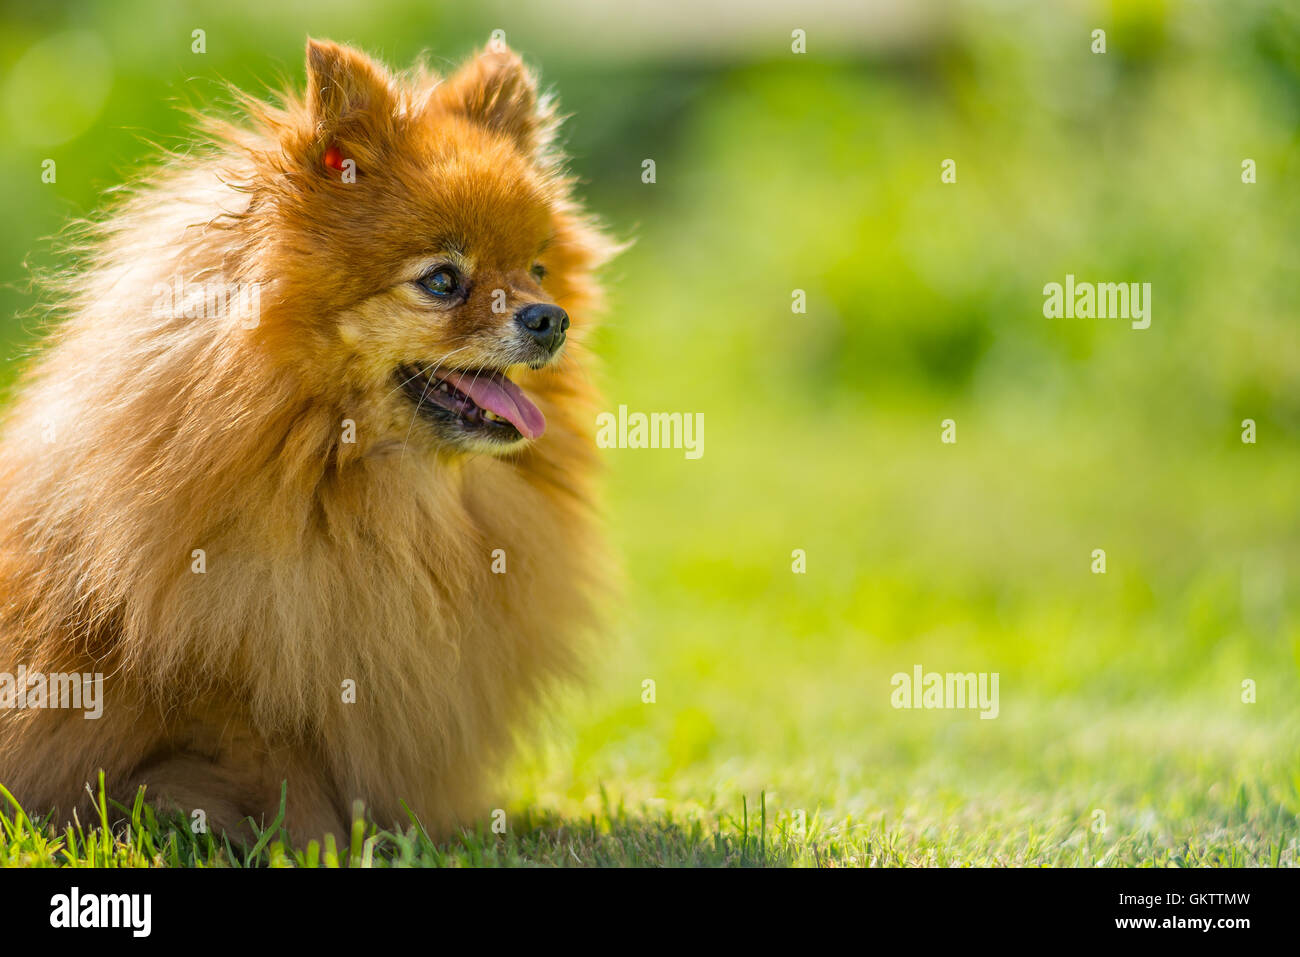 Closeup of small dog in meadow Stock Photo